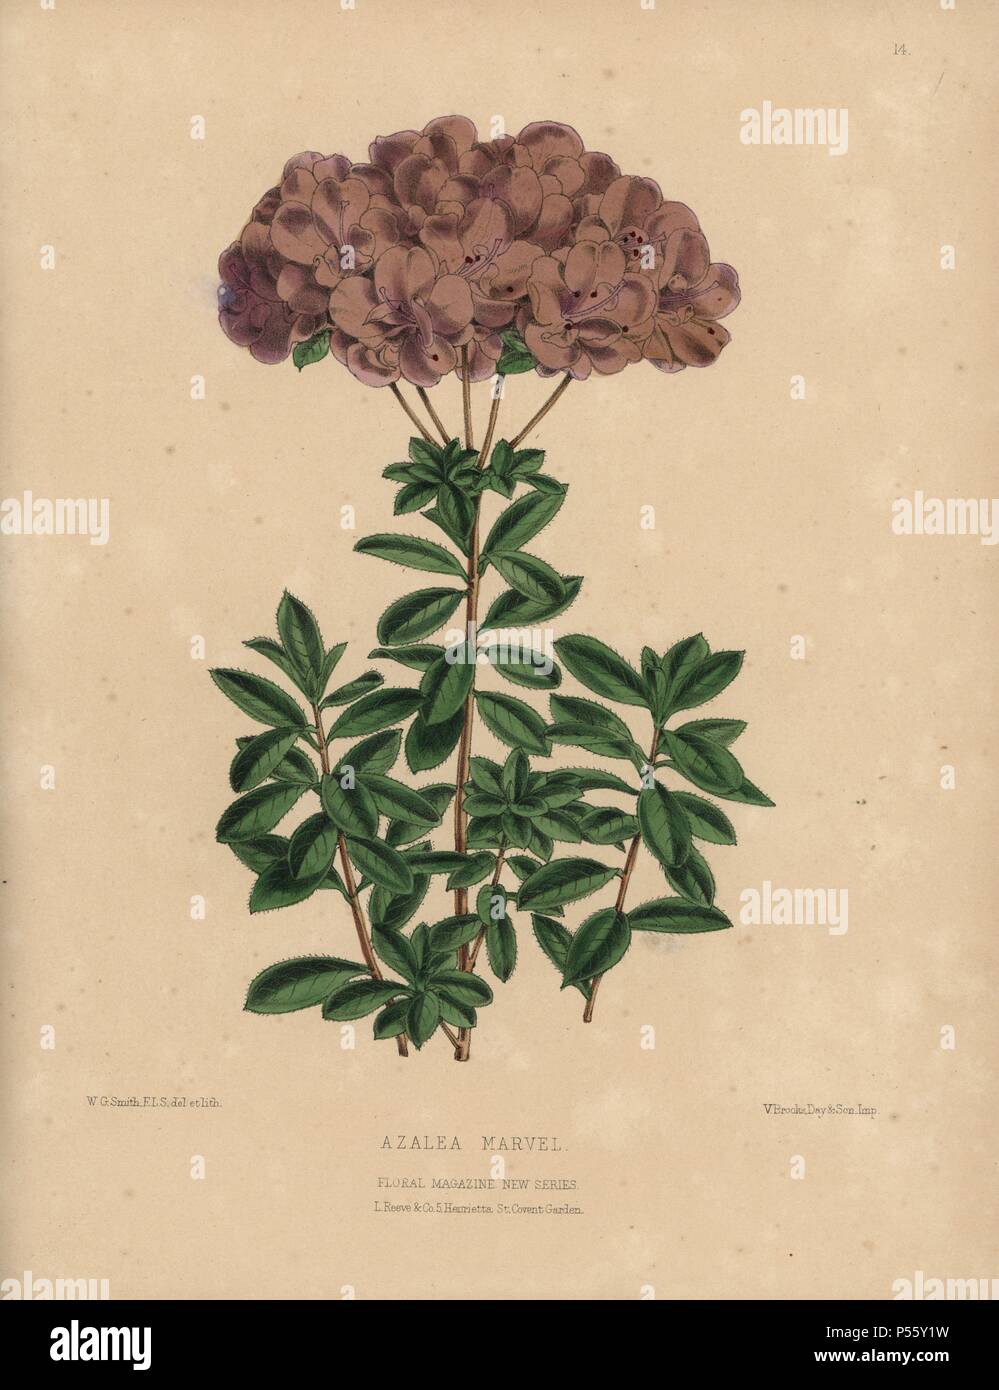 Azalea marvel, small-flowered semi-double variety of the Amcena type, with dusty purple flowers.. Handcolored botanical drawn and lithographed by W.G. Smith from H.H. Dombrain's 'Floral Magazine' 1872.. Worthington G. Smith (1835-1917), architect, engraver and mycologist. Smith also illustrated 'The Gardener's Chronicle.' Henry Honywood Dombrain (1818-1905), clergyman gardener, was editor of the 'Floral Magazine' from 1862 to 1873. Stock Photo